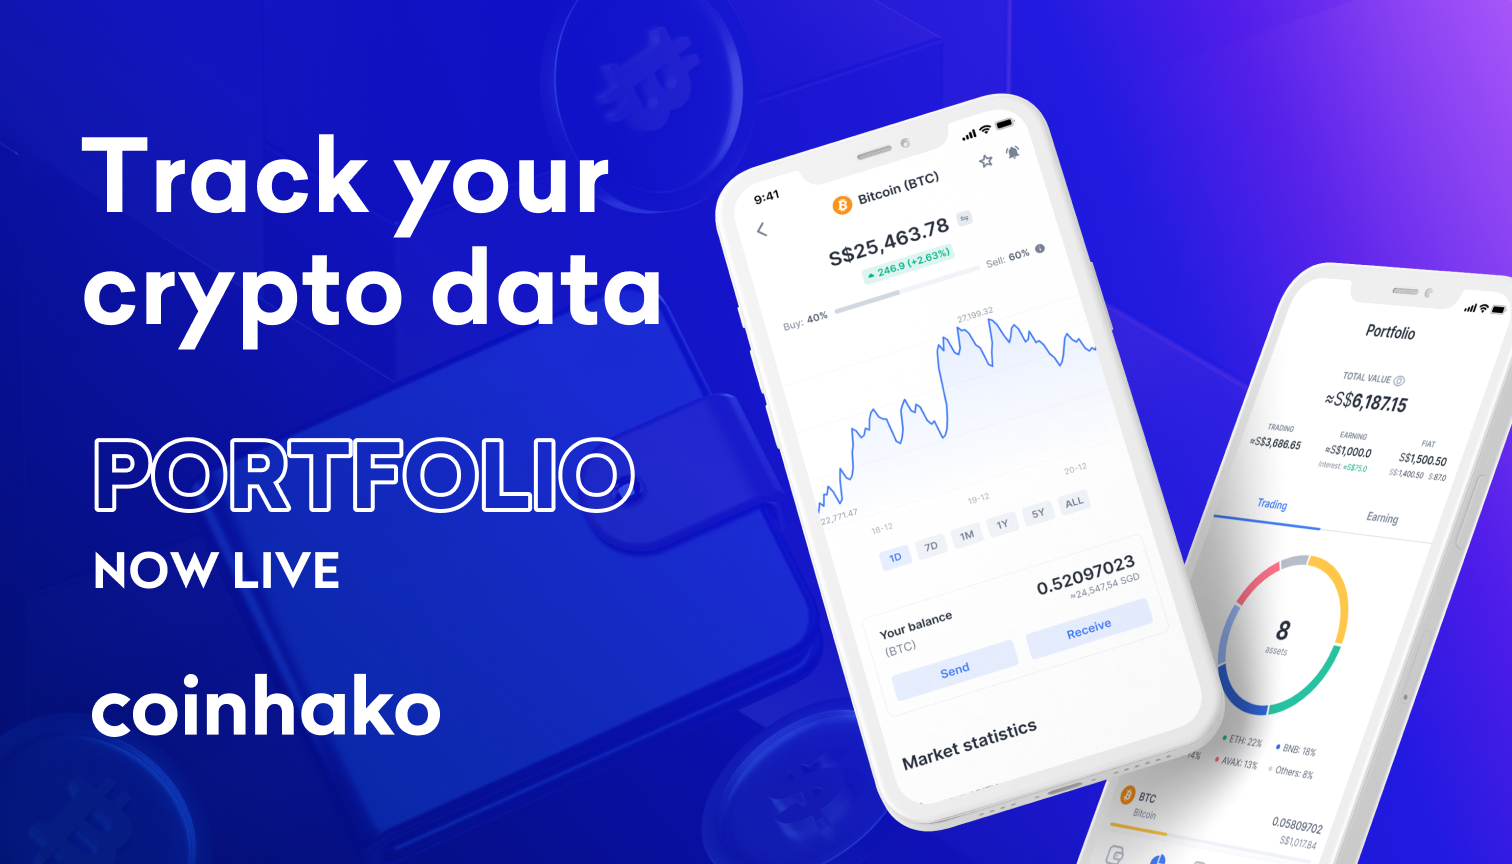 Take Charge of Your Crypto Data with Portfolio